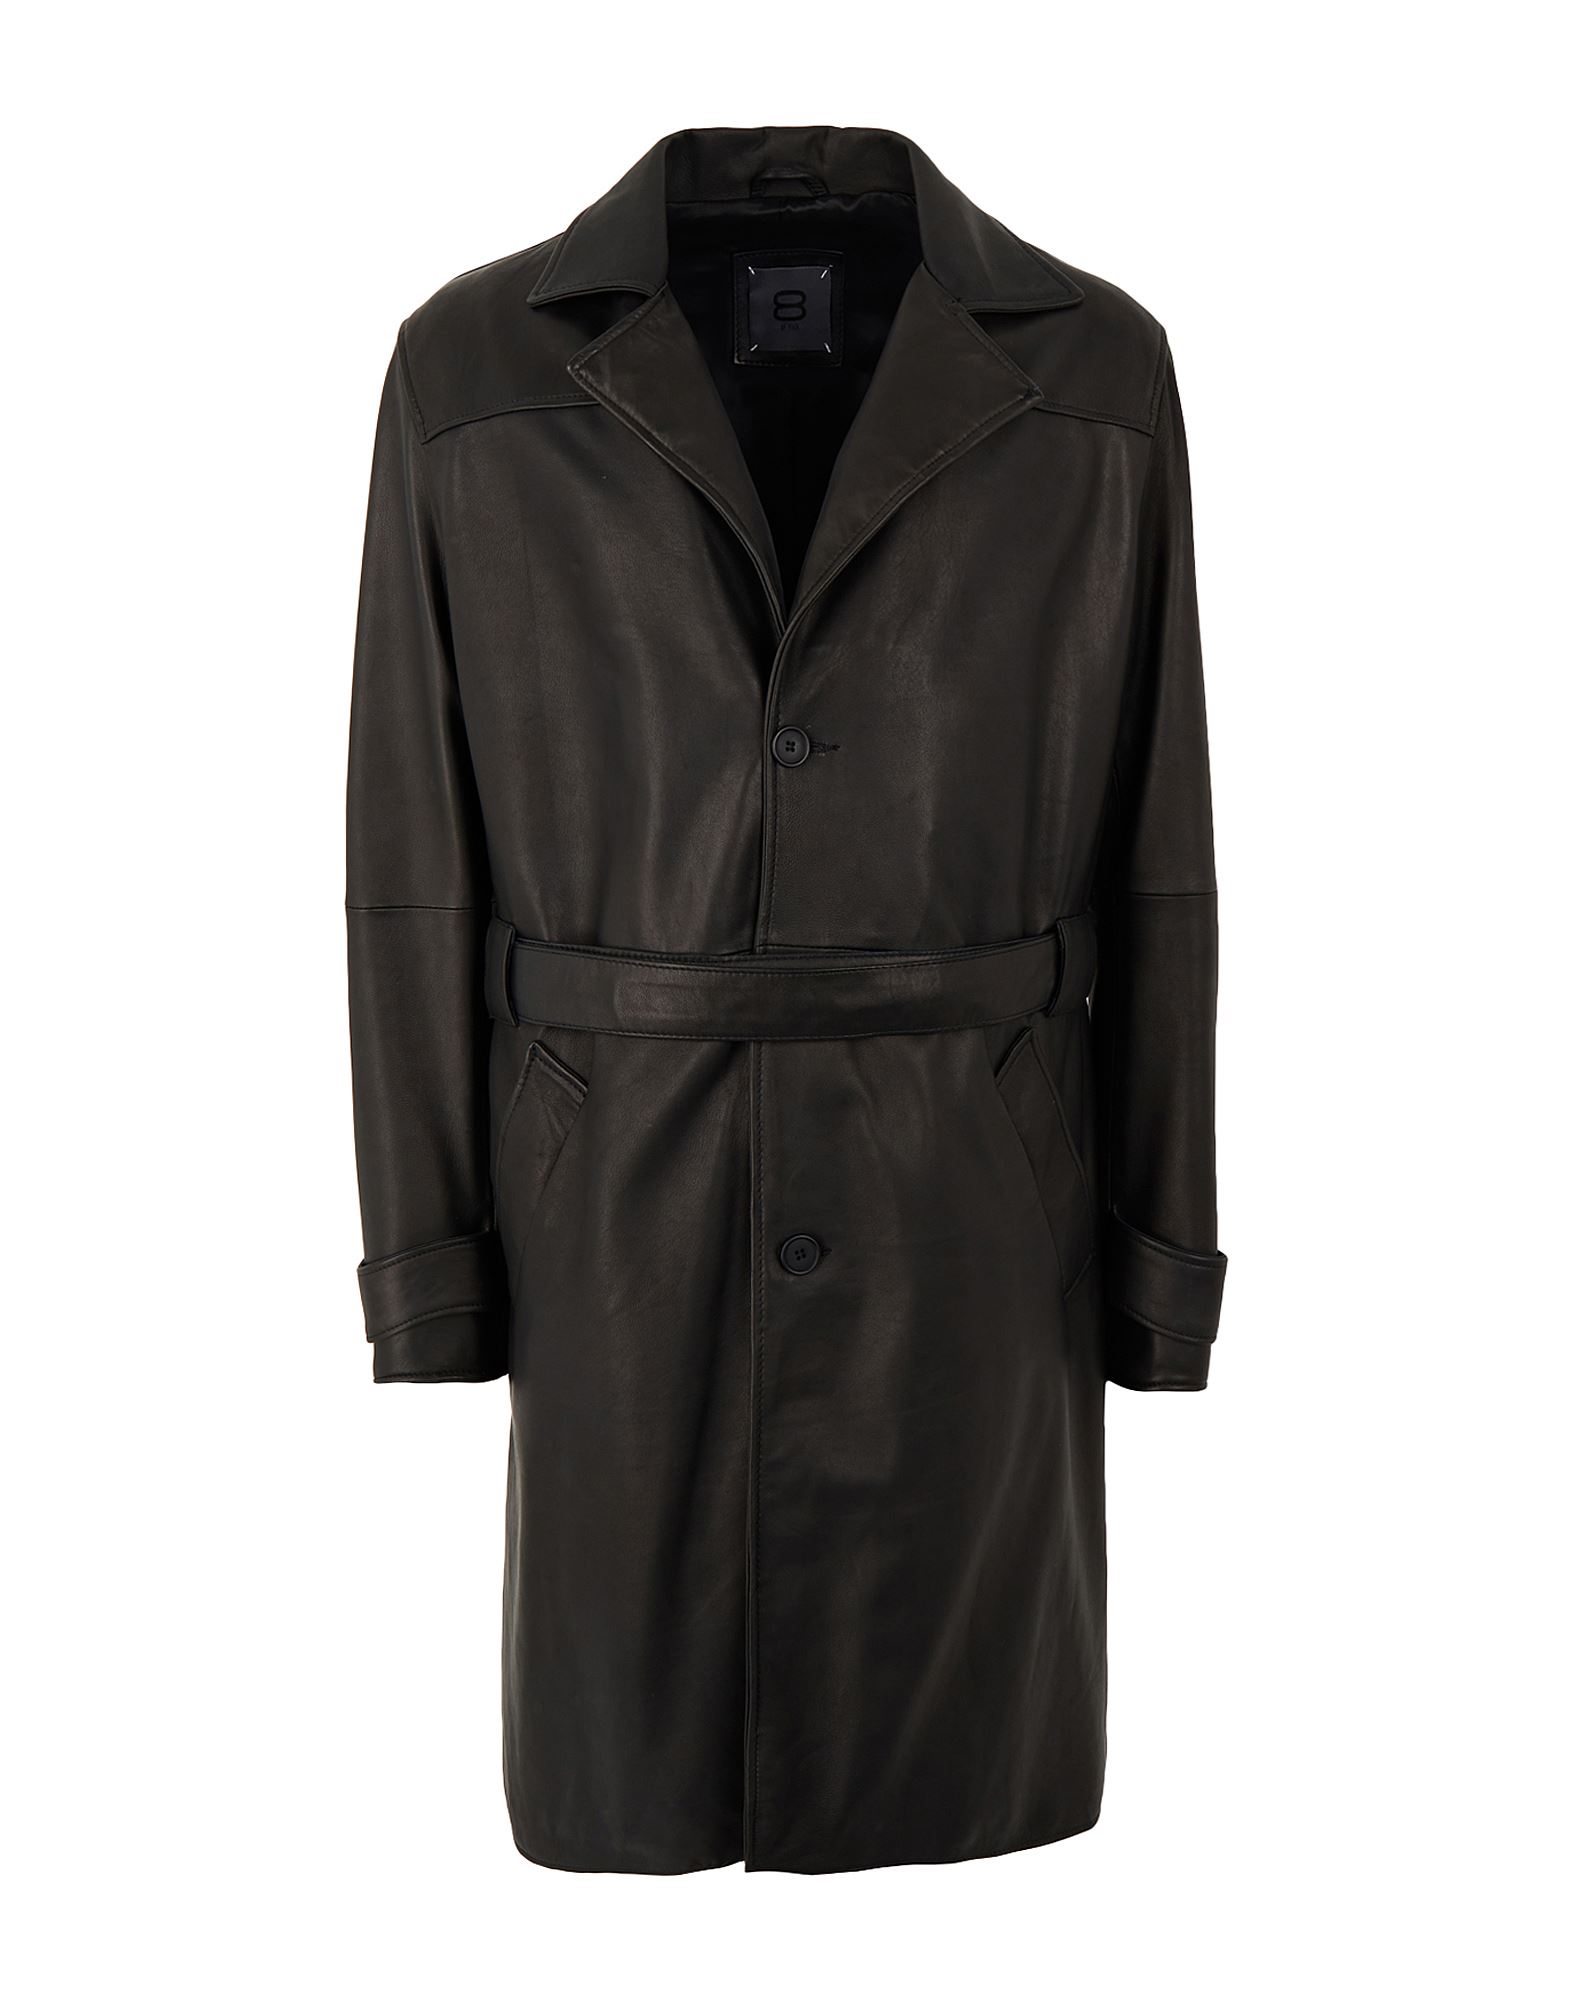 ＜YOOX＞ ★49%OFF！8 by YOOX メンズ コート ブラック 46 羊革（ラムスキン） 100% LEATHER LOOSE FIT LONG TRENCH